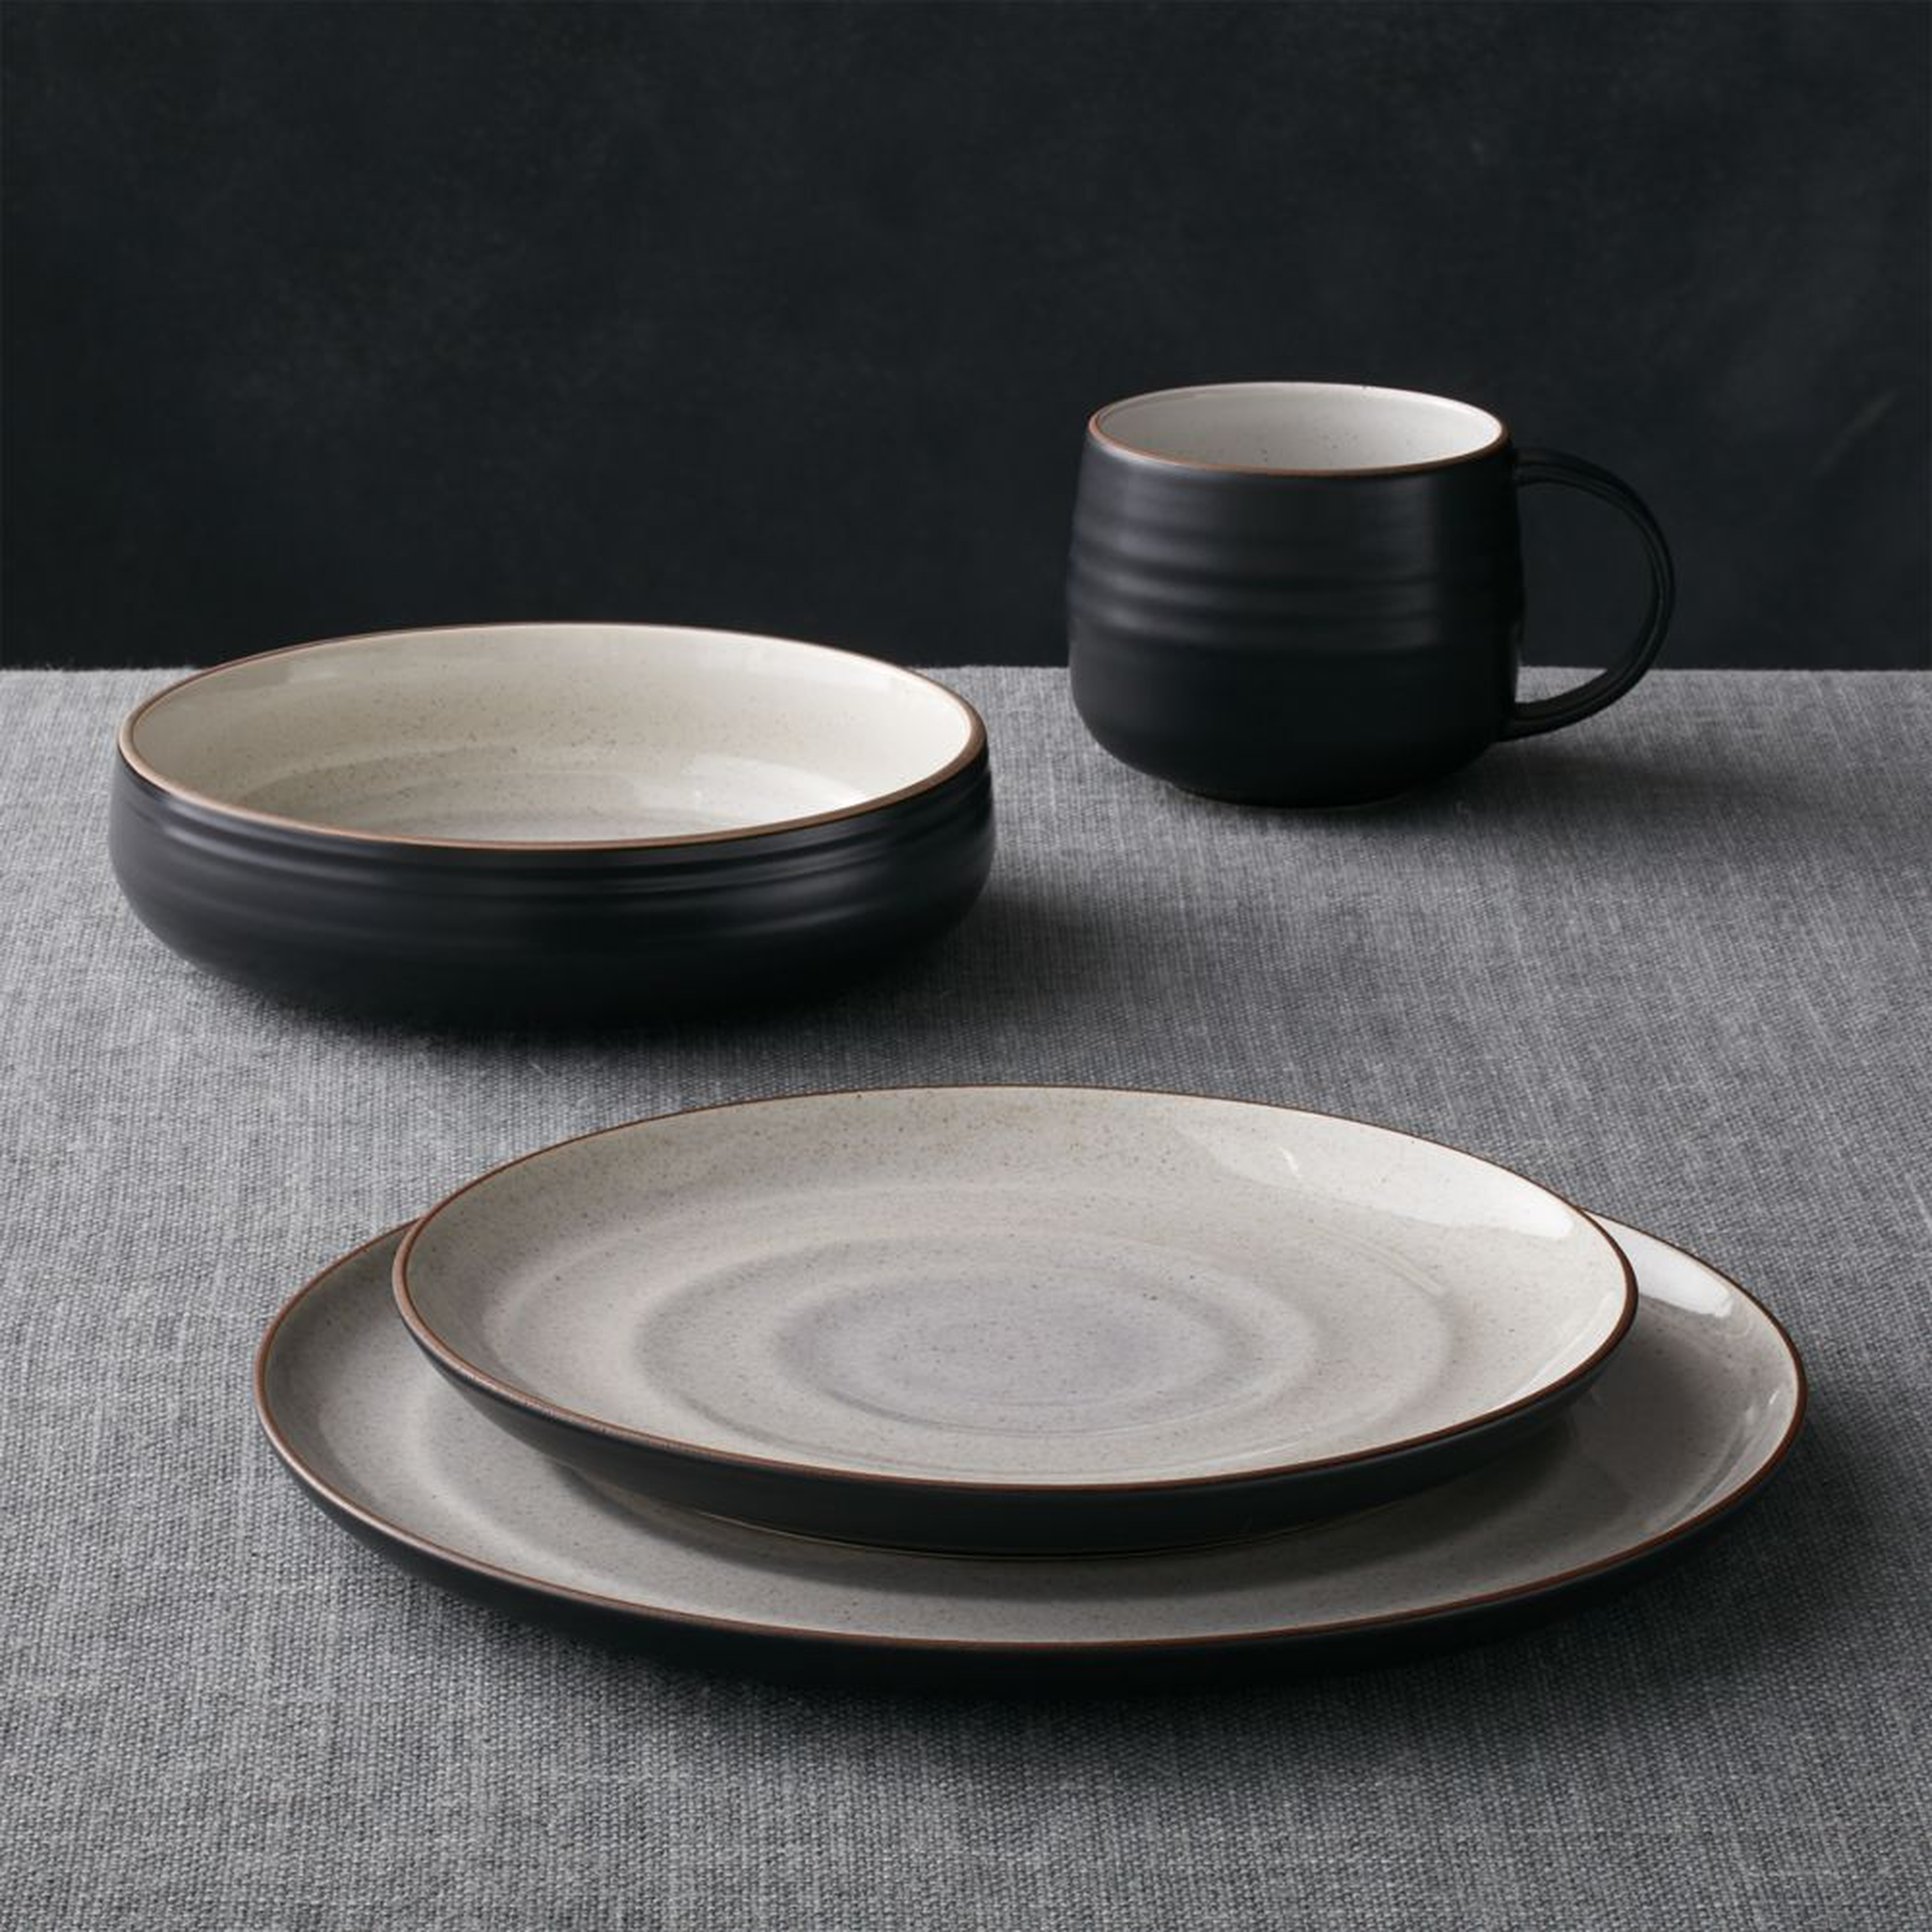 18th Street 4-Piece Place Setting with Low Bowl - Crate and Barrel